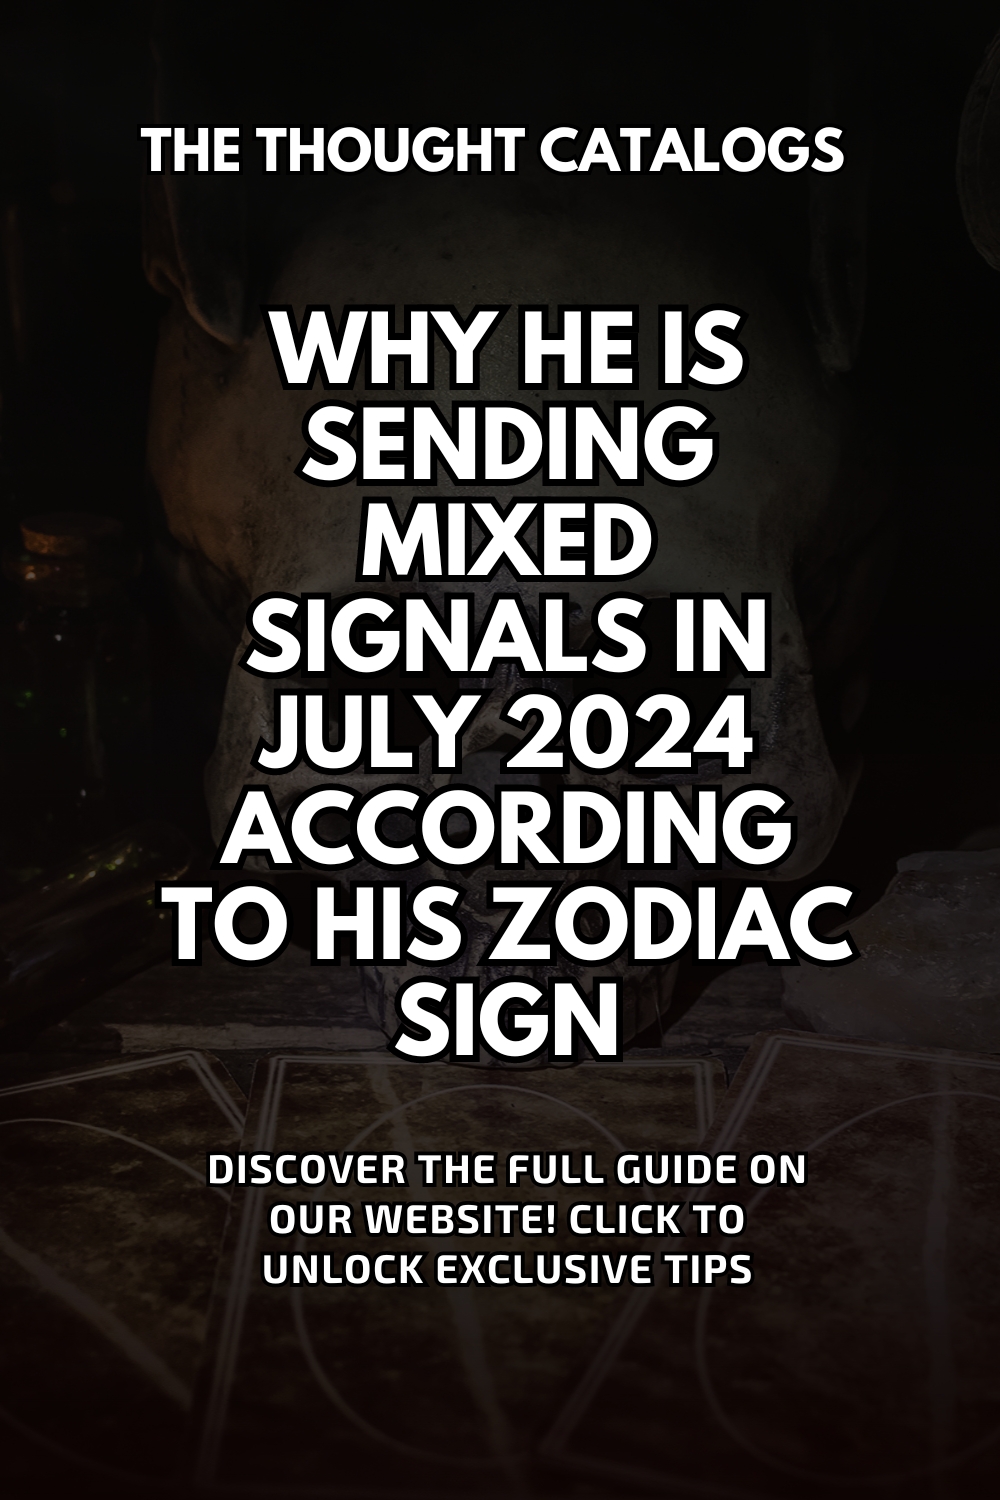 Why He Is Sending Mixed Signals In July 2024 According To His Zodiac Sign